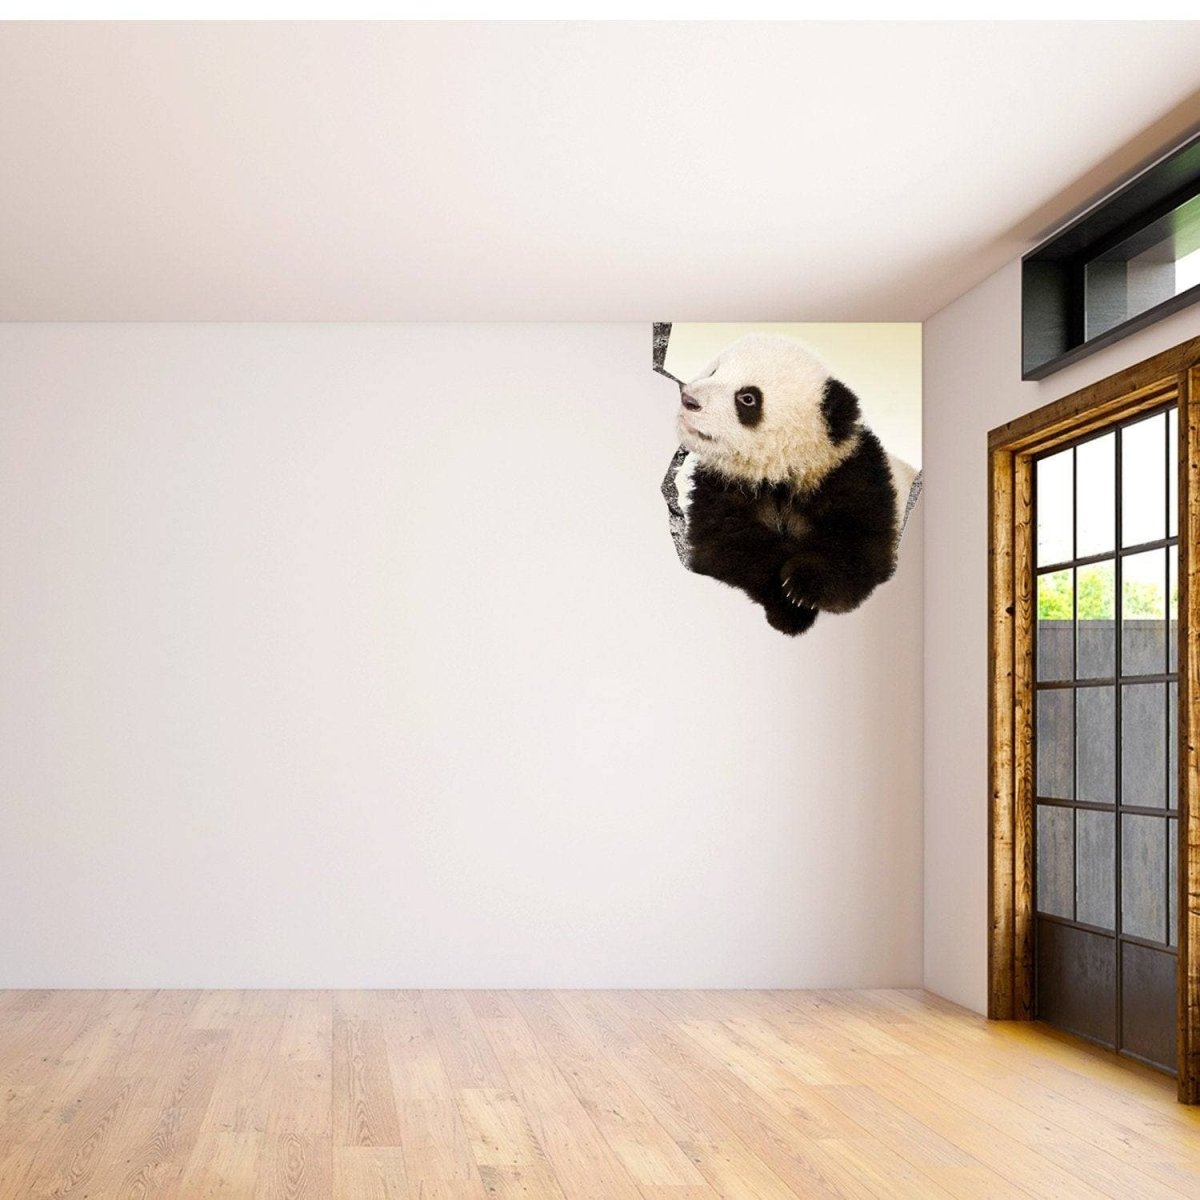 3D Wildlife Porthole Wall Decal - Transform Your Space with Illusionary Art - Decords